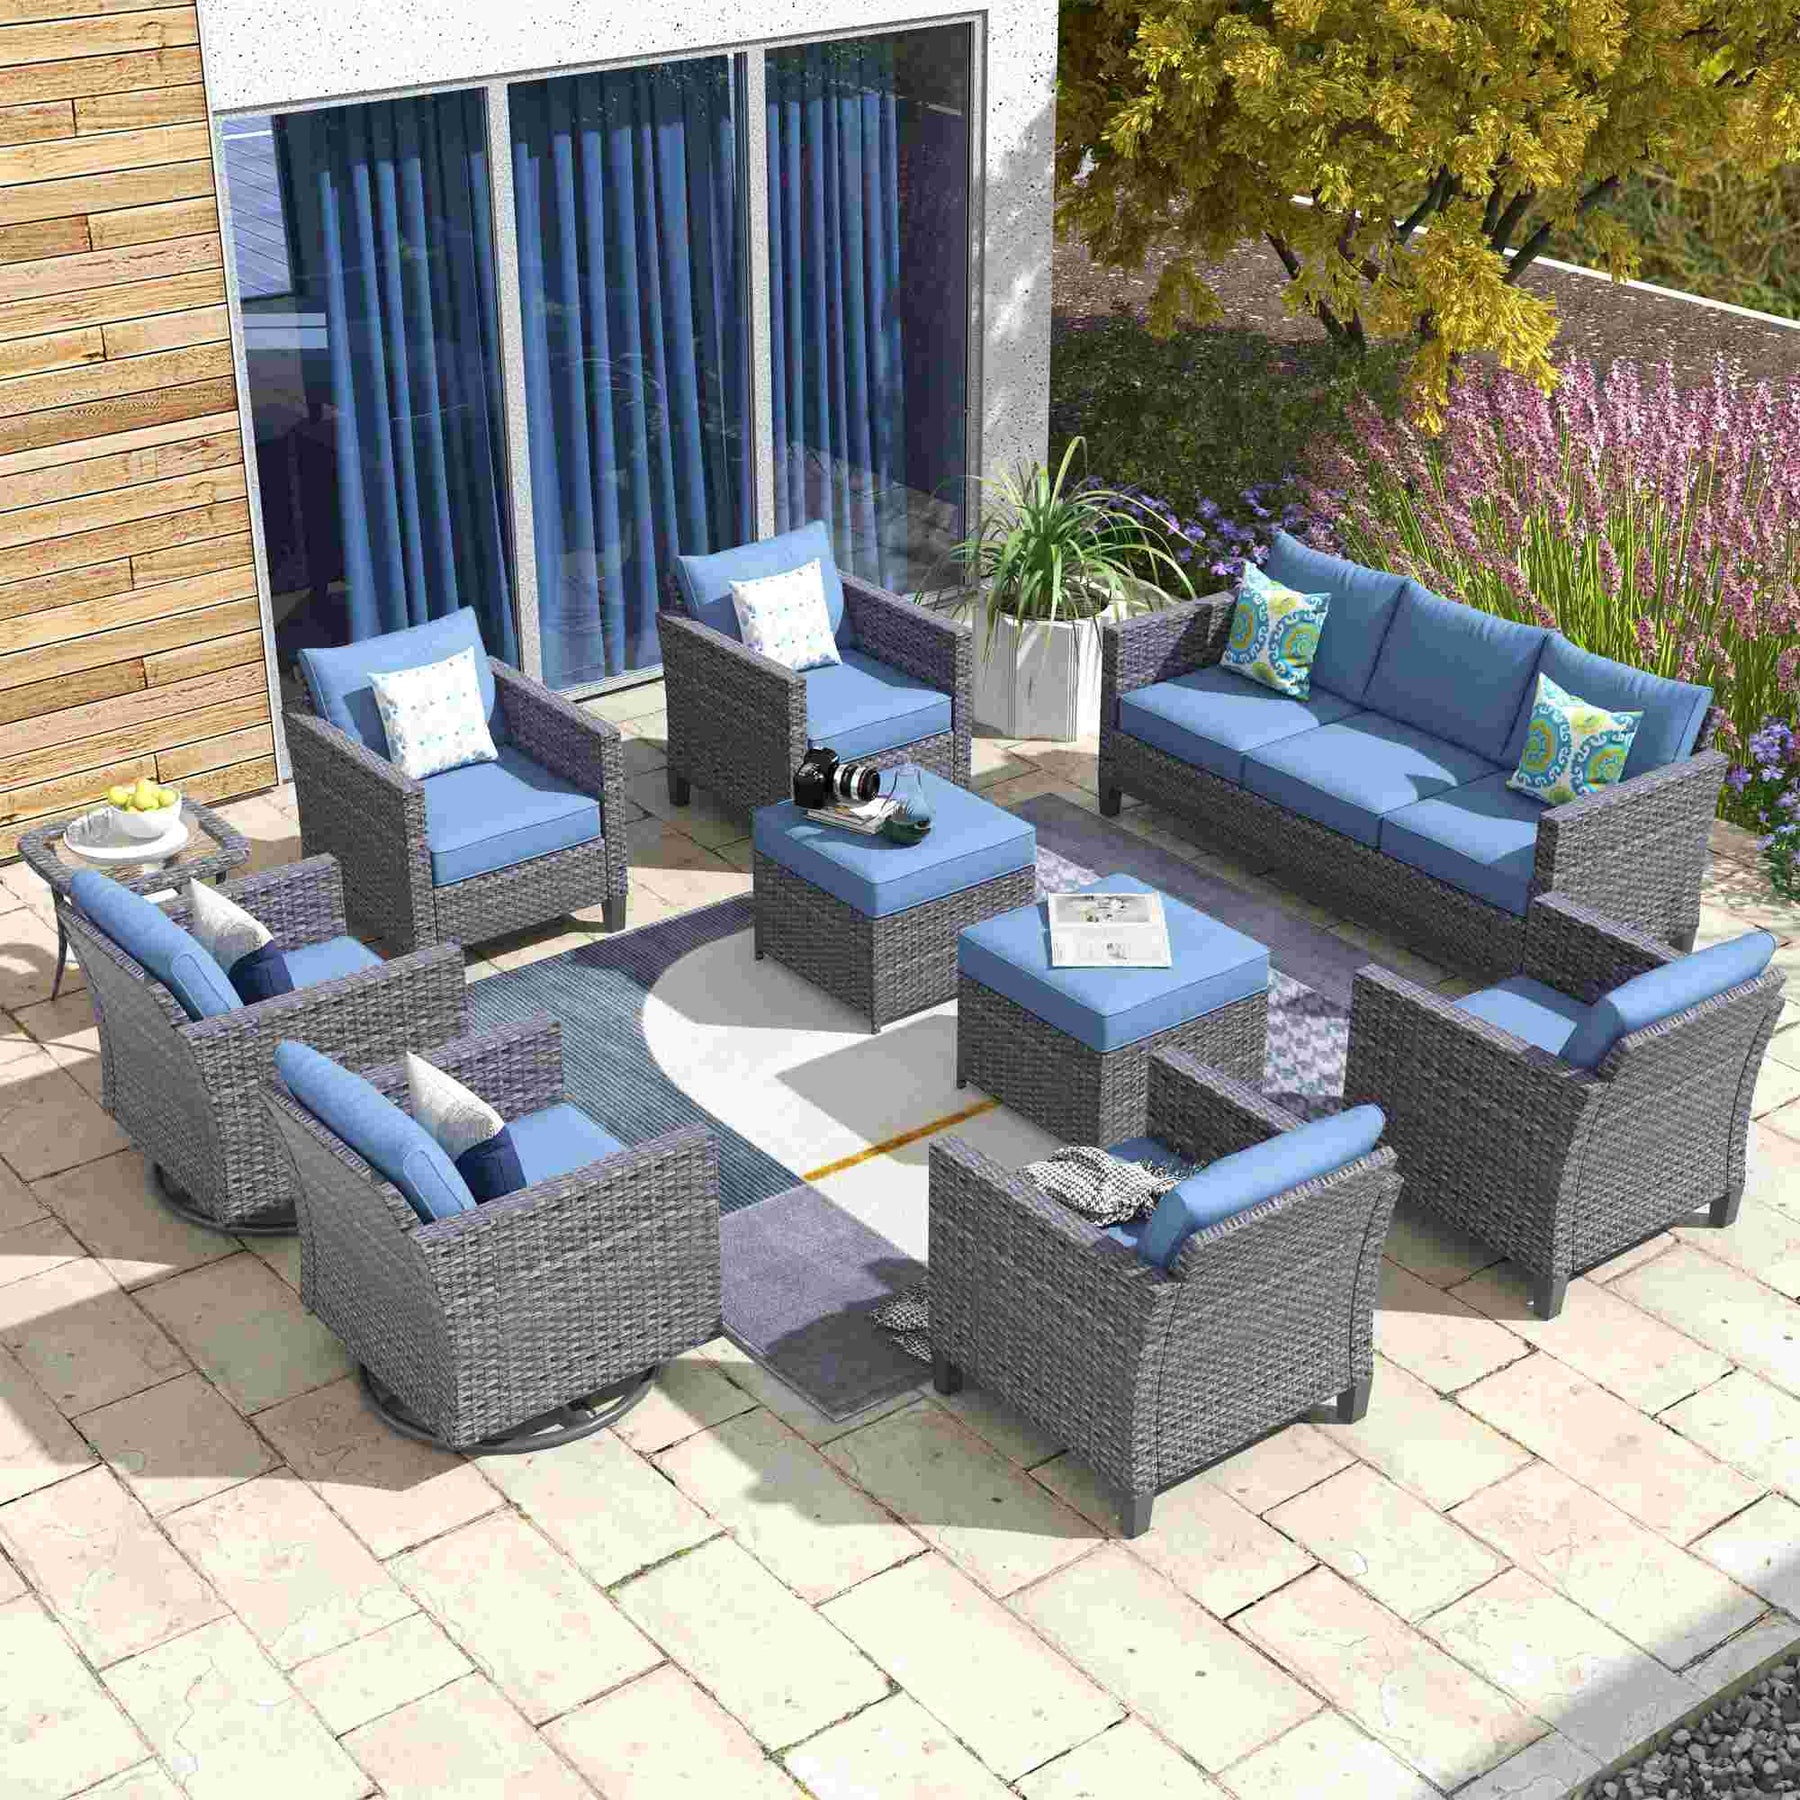 Ovios Patio Conversation Set 10-Piece with Swivel Rocking Chairs and Table